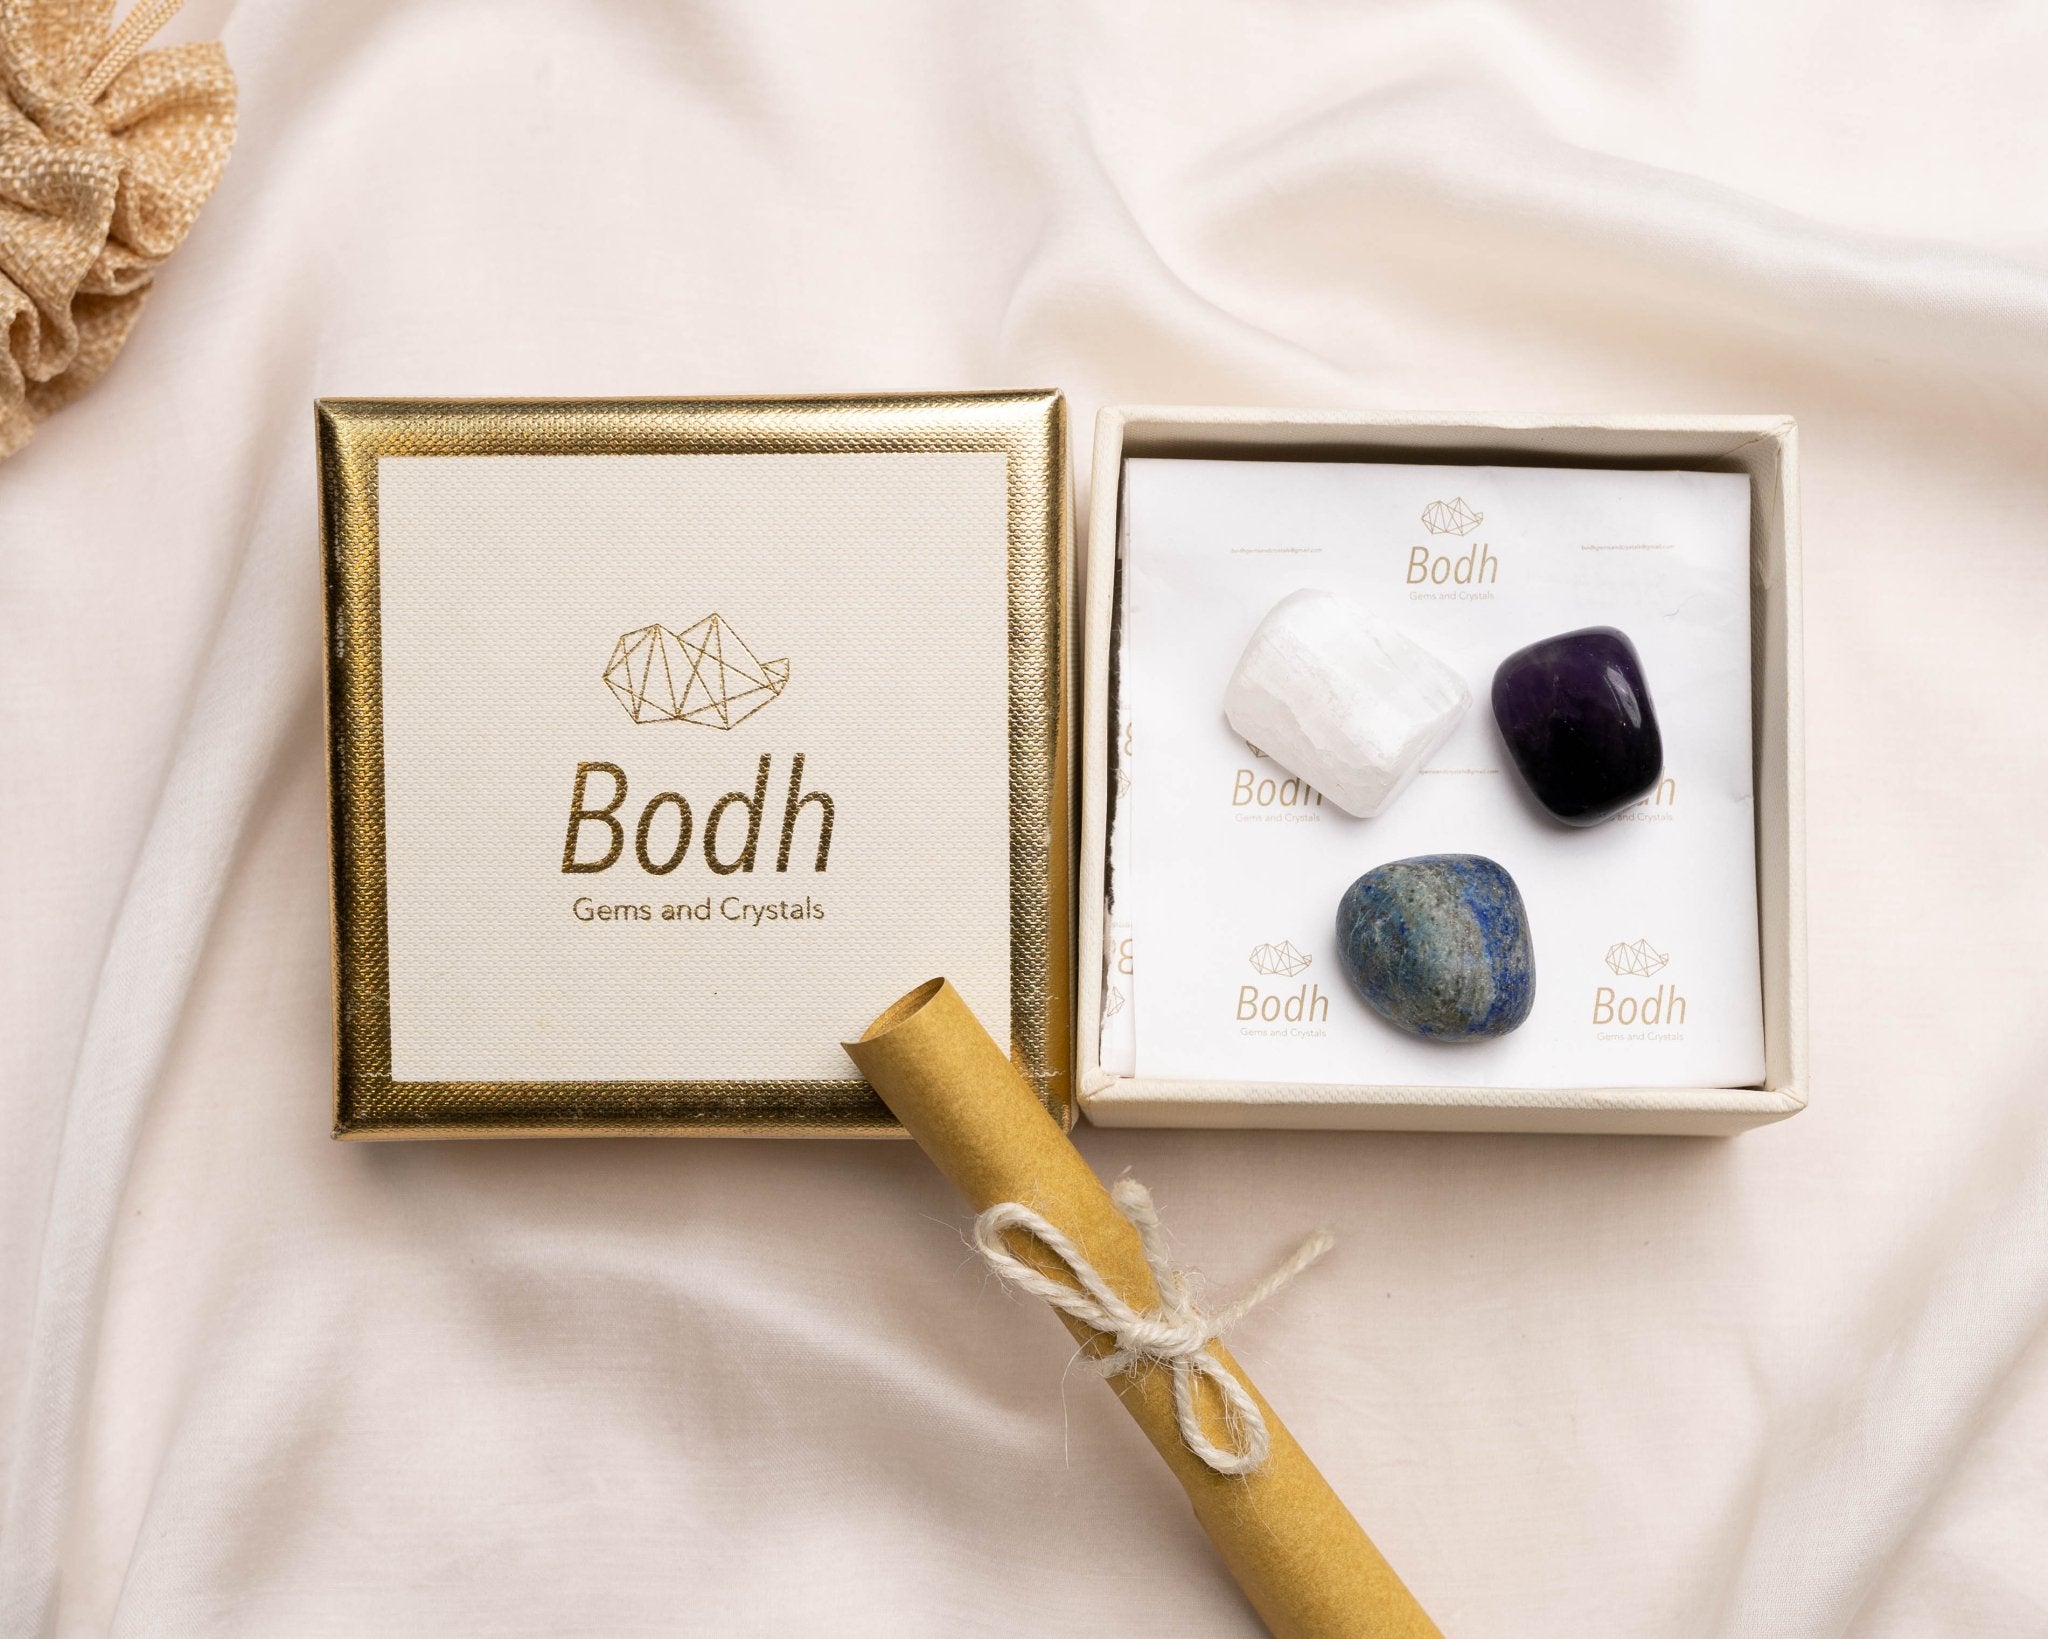 Focus & Concentration Kit - Bodh Gem and Crystals